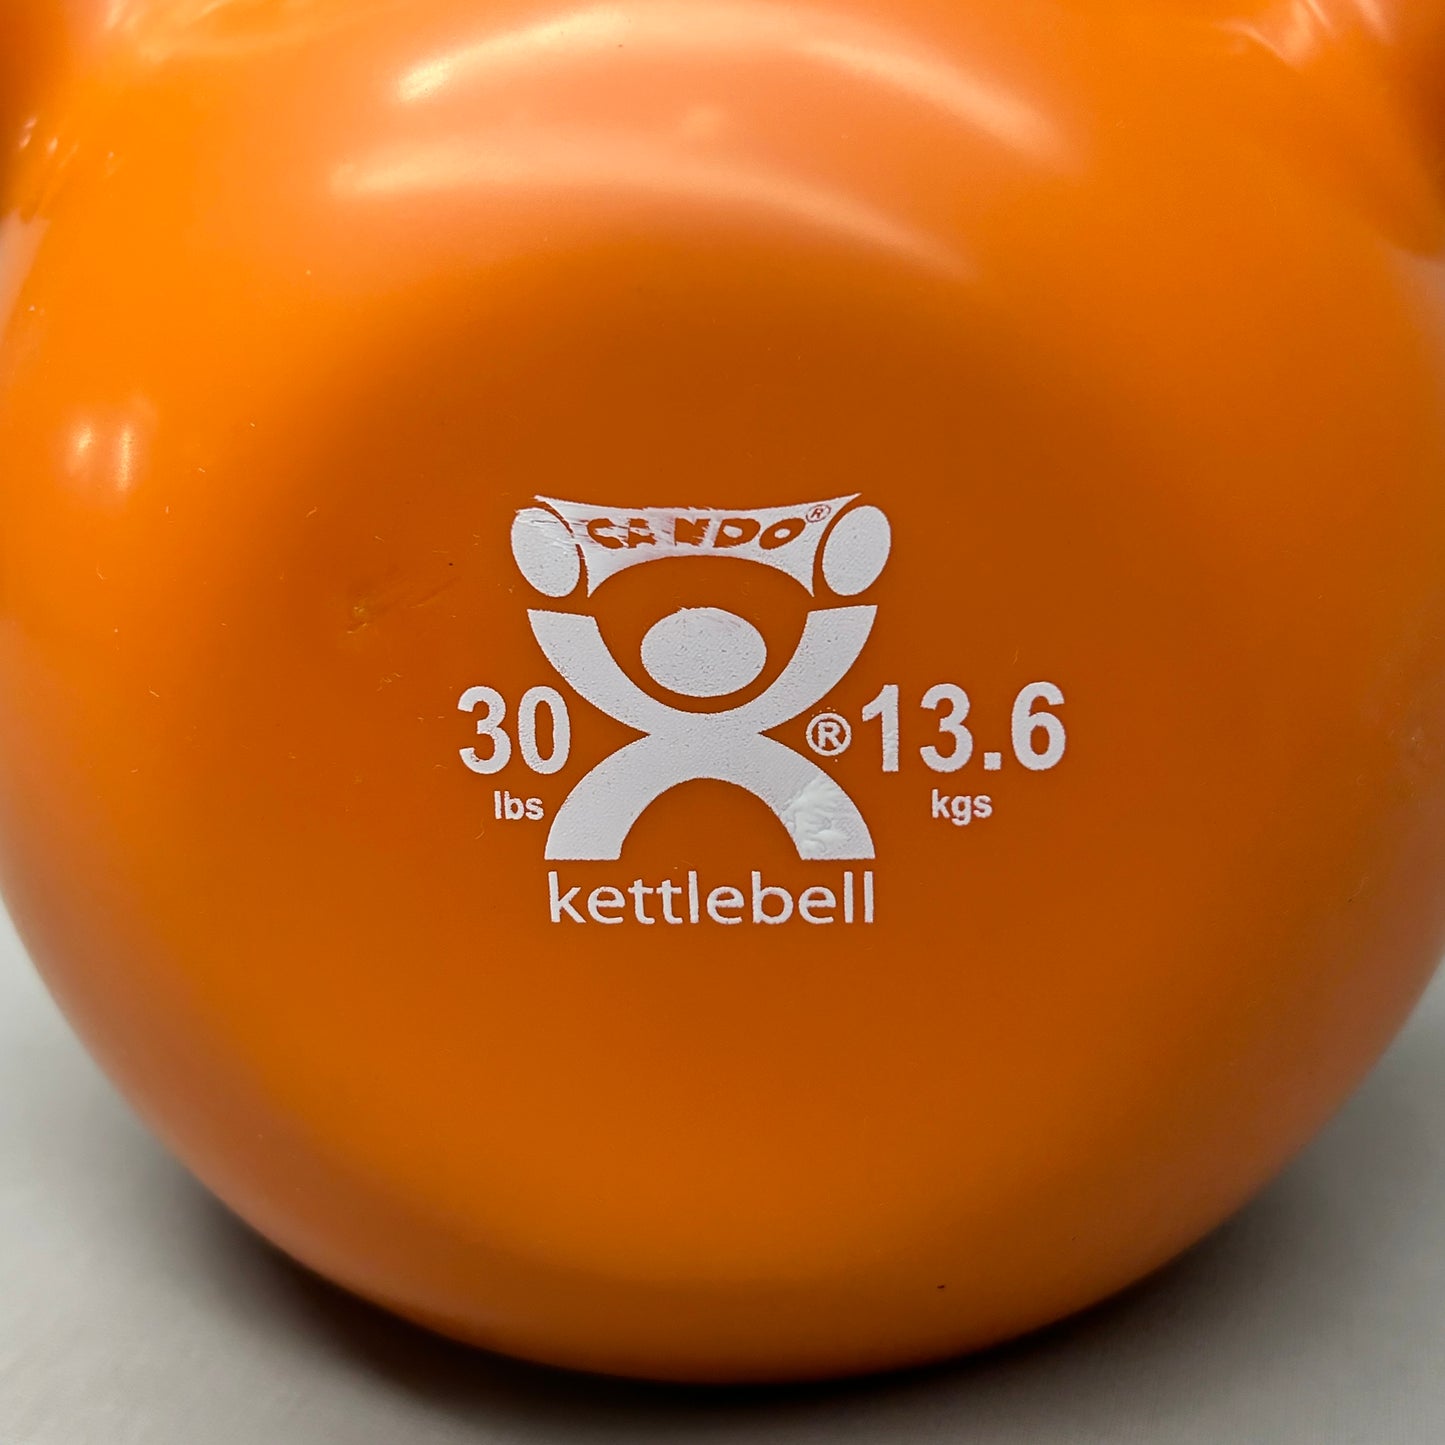 CANDO Vinyl Coated Kettlebell Weight 30 lb Gold (New)